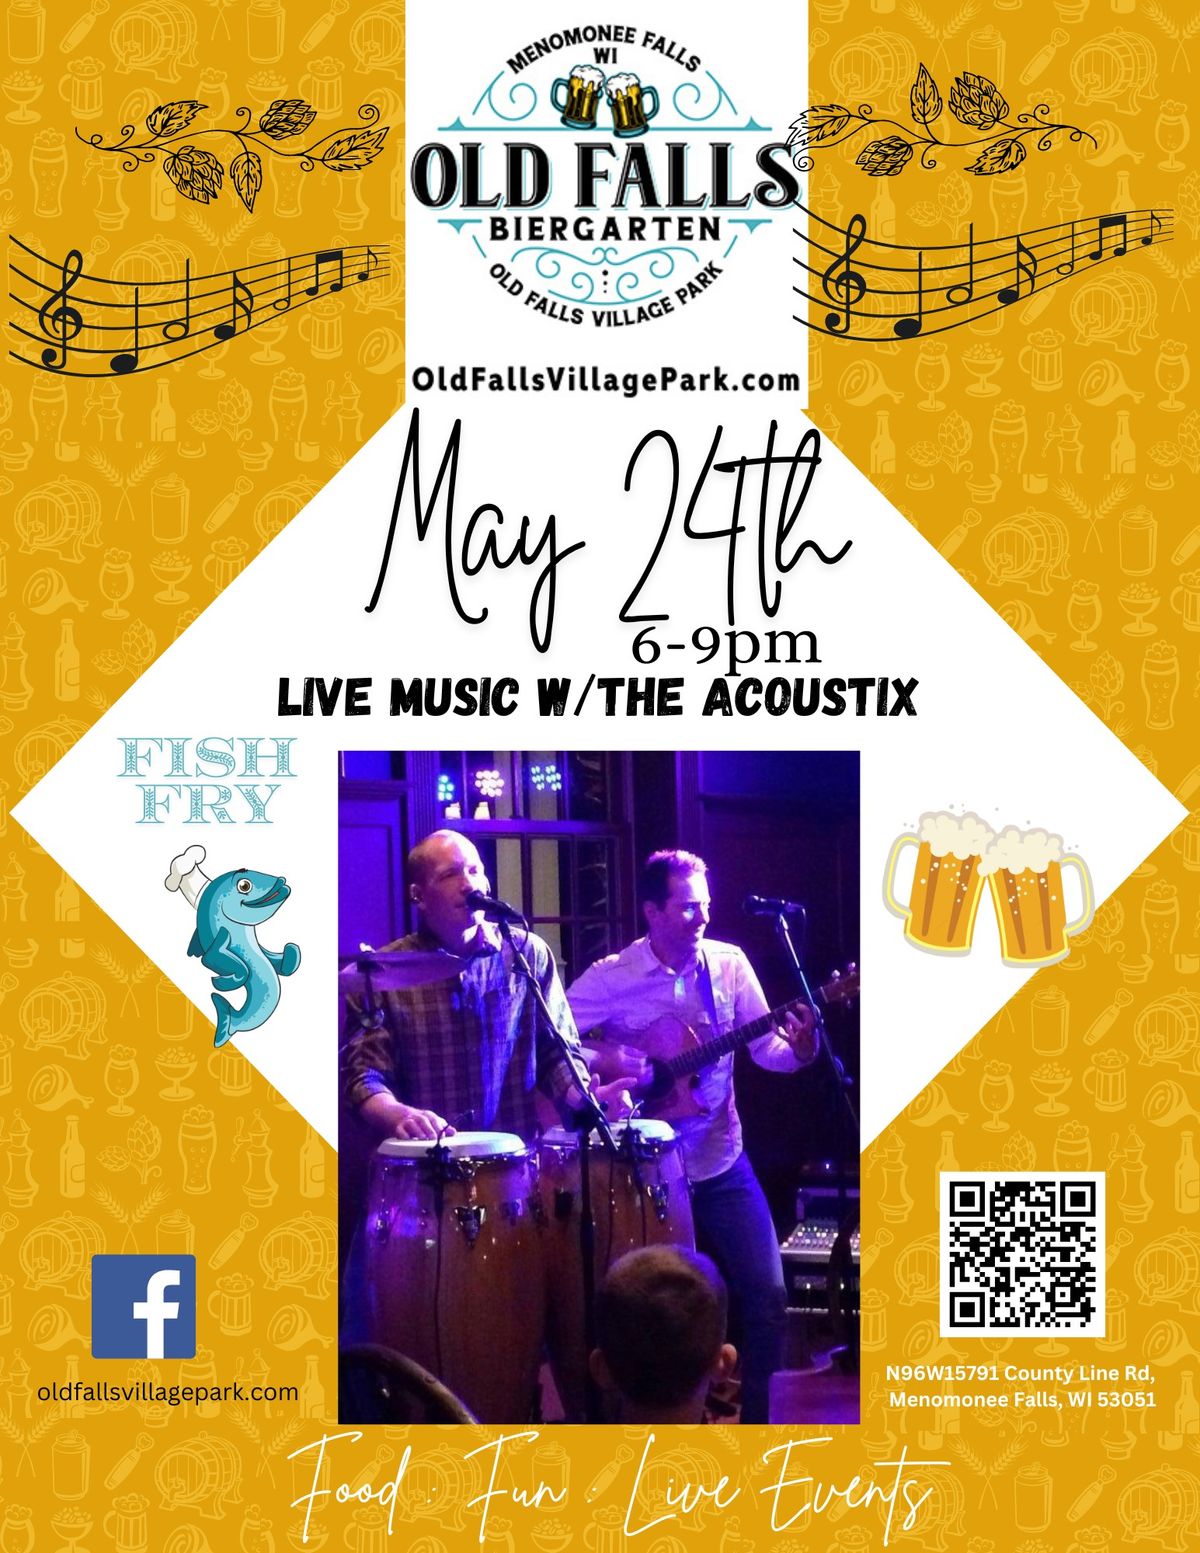 Live music at the Old Falls Biergarten with The Acoustix